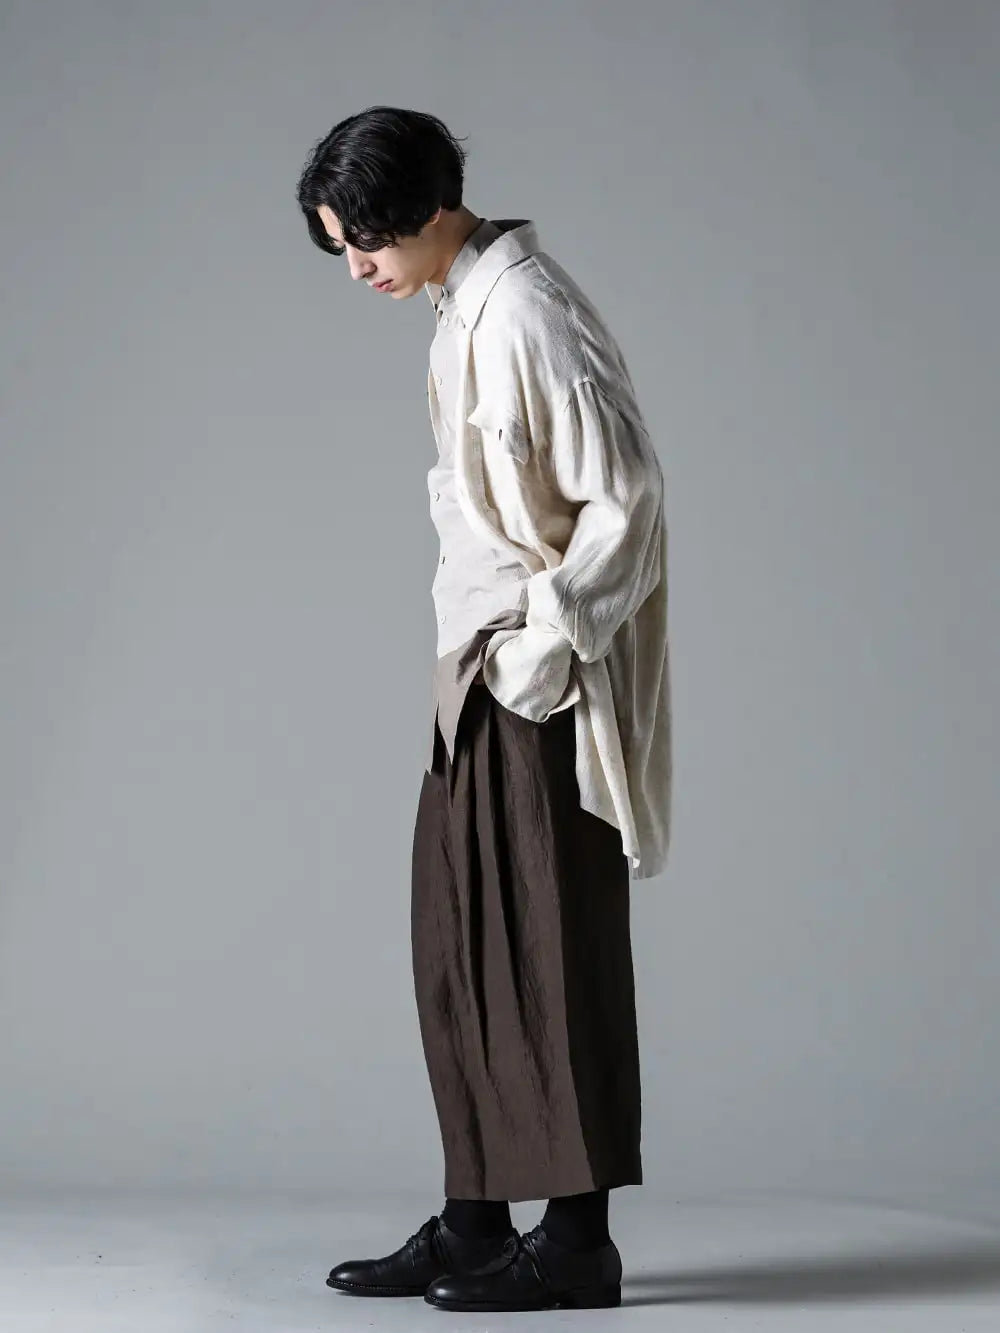 Peng Tai DEVOA ZIGGY CHEN GUIDI  24SS スタイリング - Choose items that go well with the three brands featuring distinct nuances - PTS24M06-2 Hand Dye Double Pocket Oversized Shirt SHE-CTKM Shirt Cotton 0M2410509 Plaited Extra Wide Leg Trousers Classic Derby Shoes Lace Up Single Sole - Horse Full Grain - 992X Black 1-003